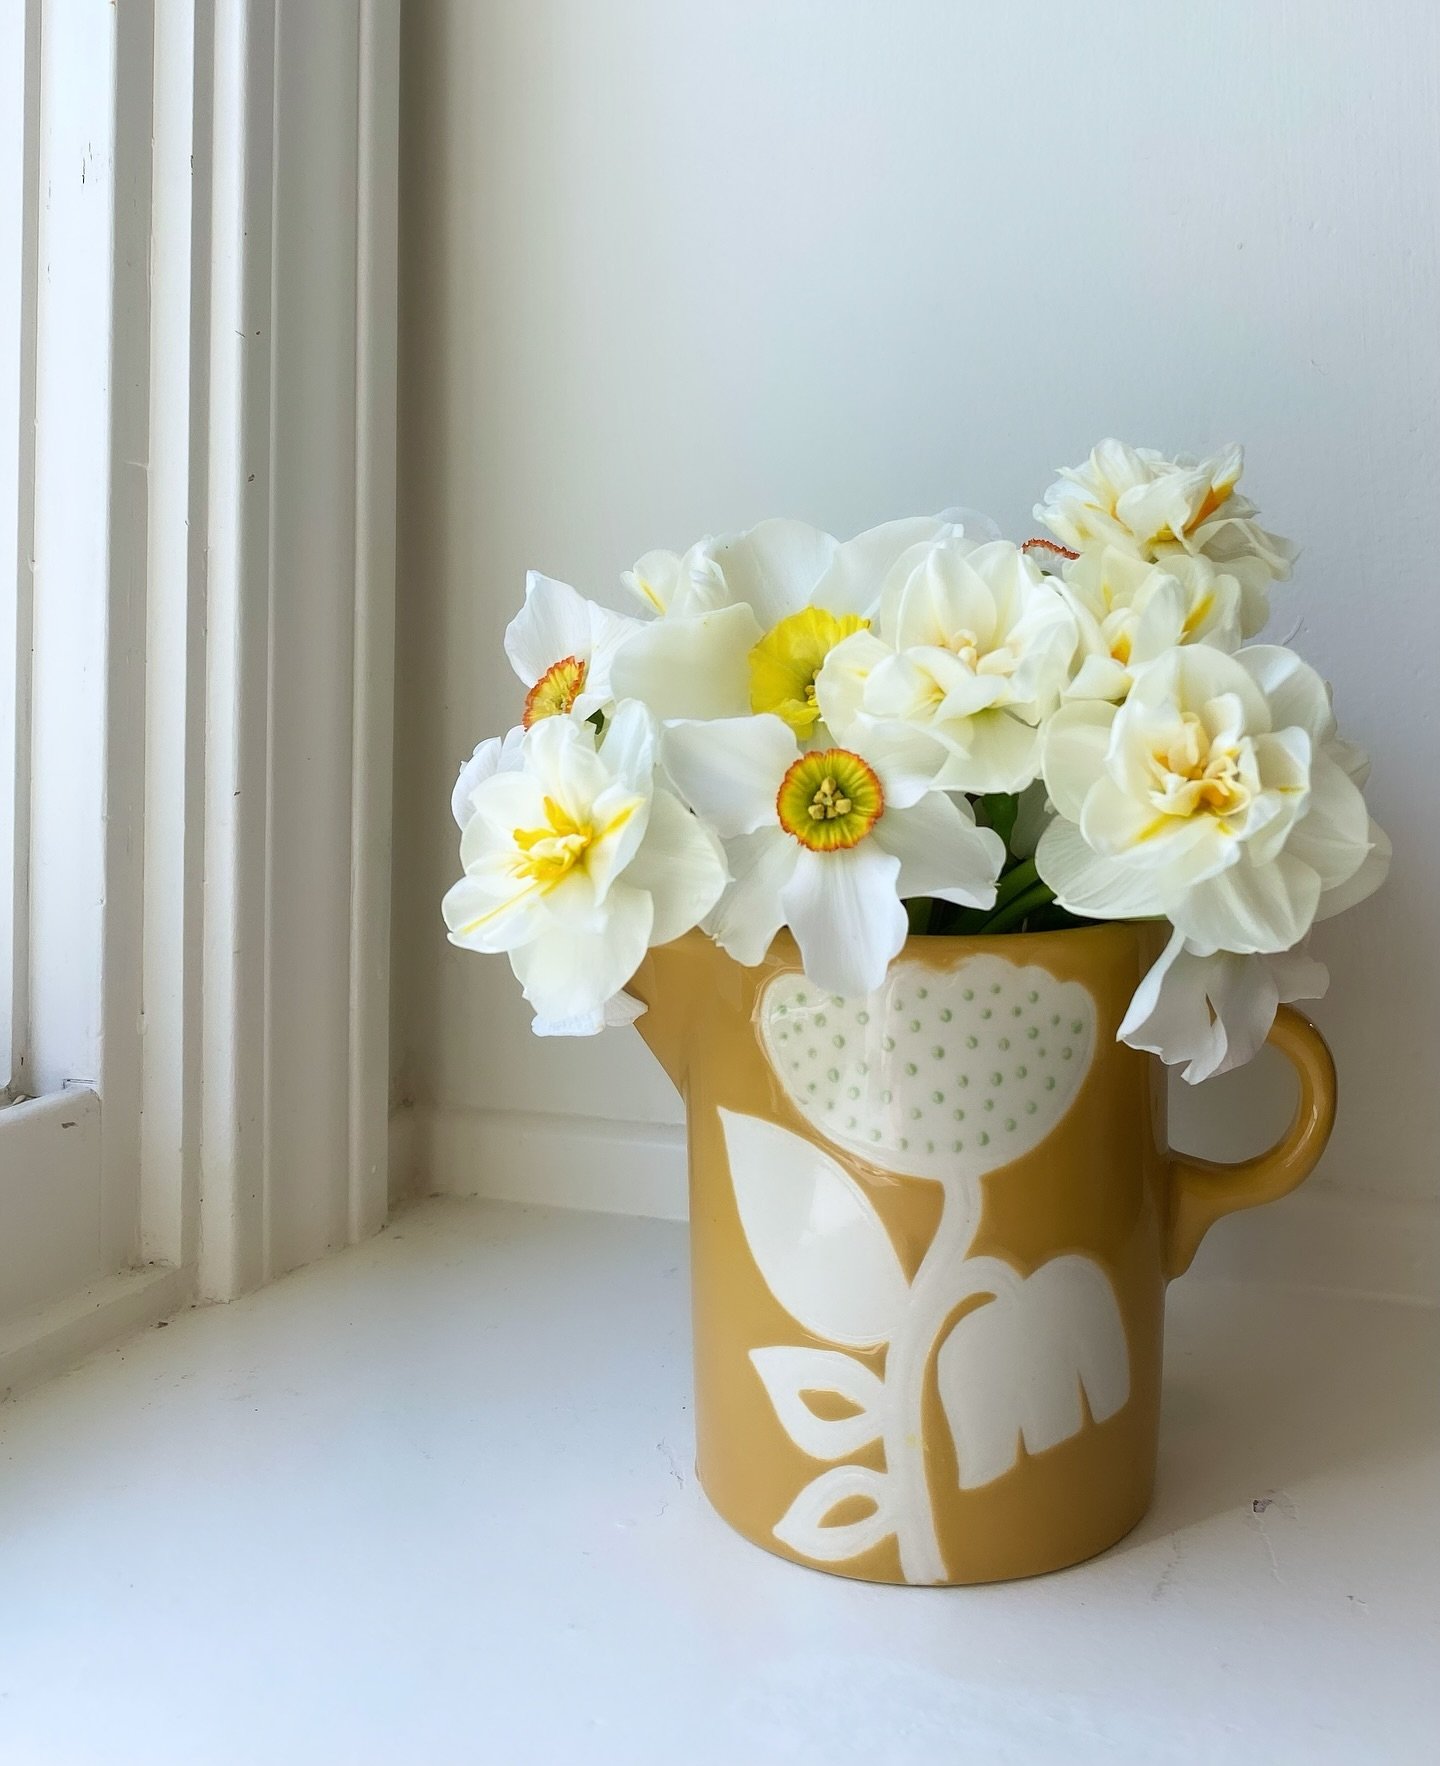 I was so happy there were a couple of these creamer dishes left when I stopped into @silverinthecitycarmel. I saw it last time I was in&hellip;looks just as adorable with daffodils as I&rsquo;d imagined ☺️ My favorite local shop for thoughtful gifts 